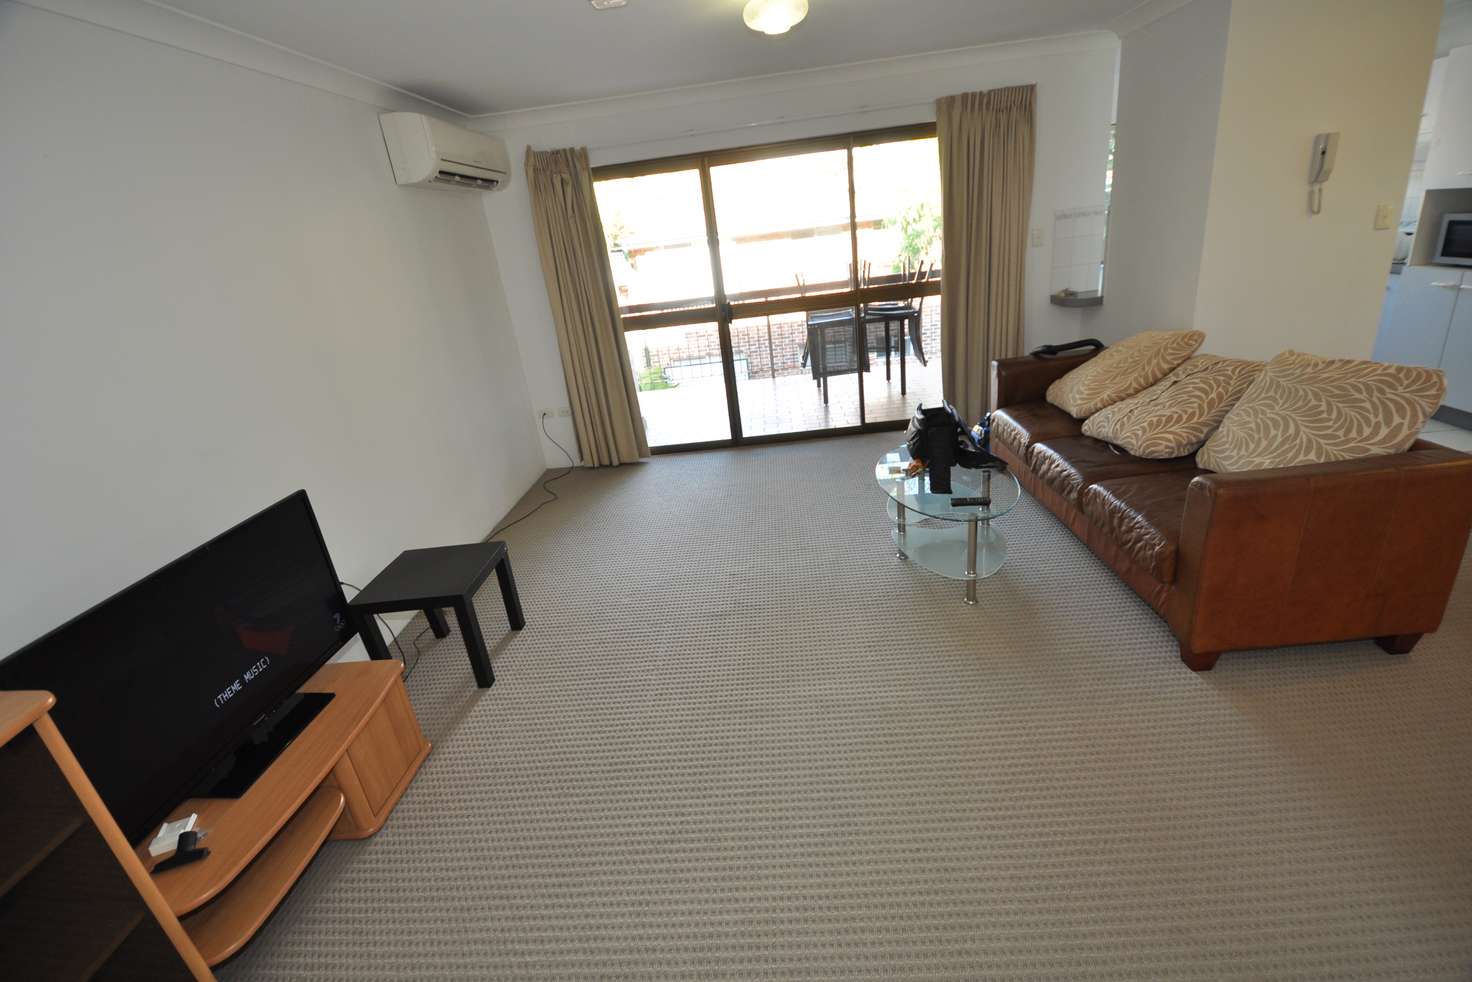 Main view of Homely apartment listing, 7/87 Macquarie St, St Lucia QLD 4067